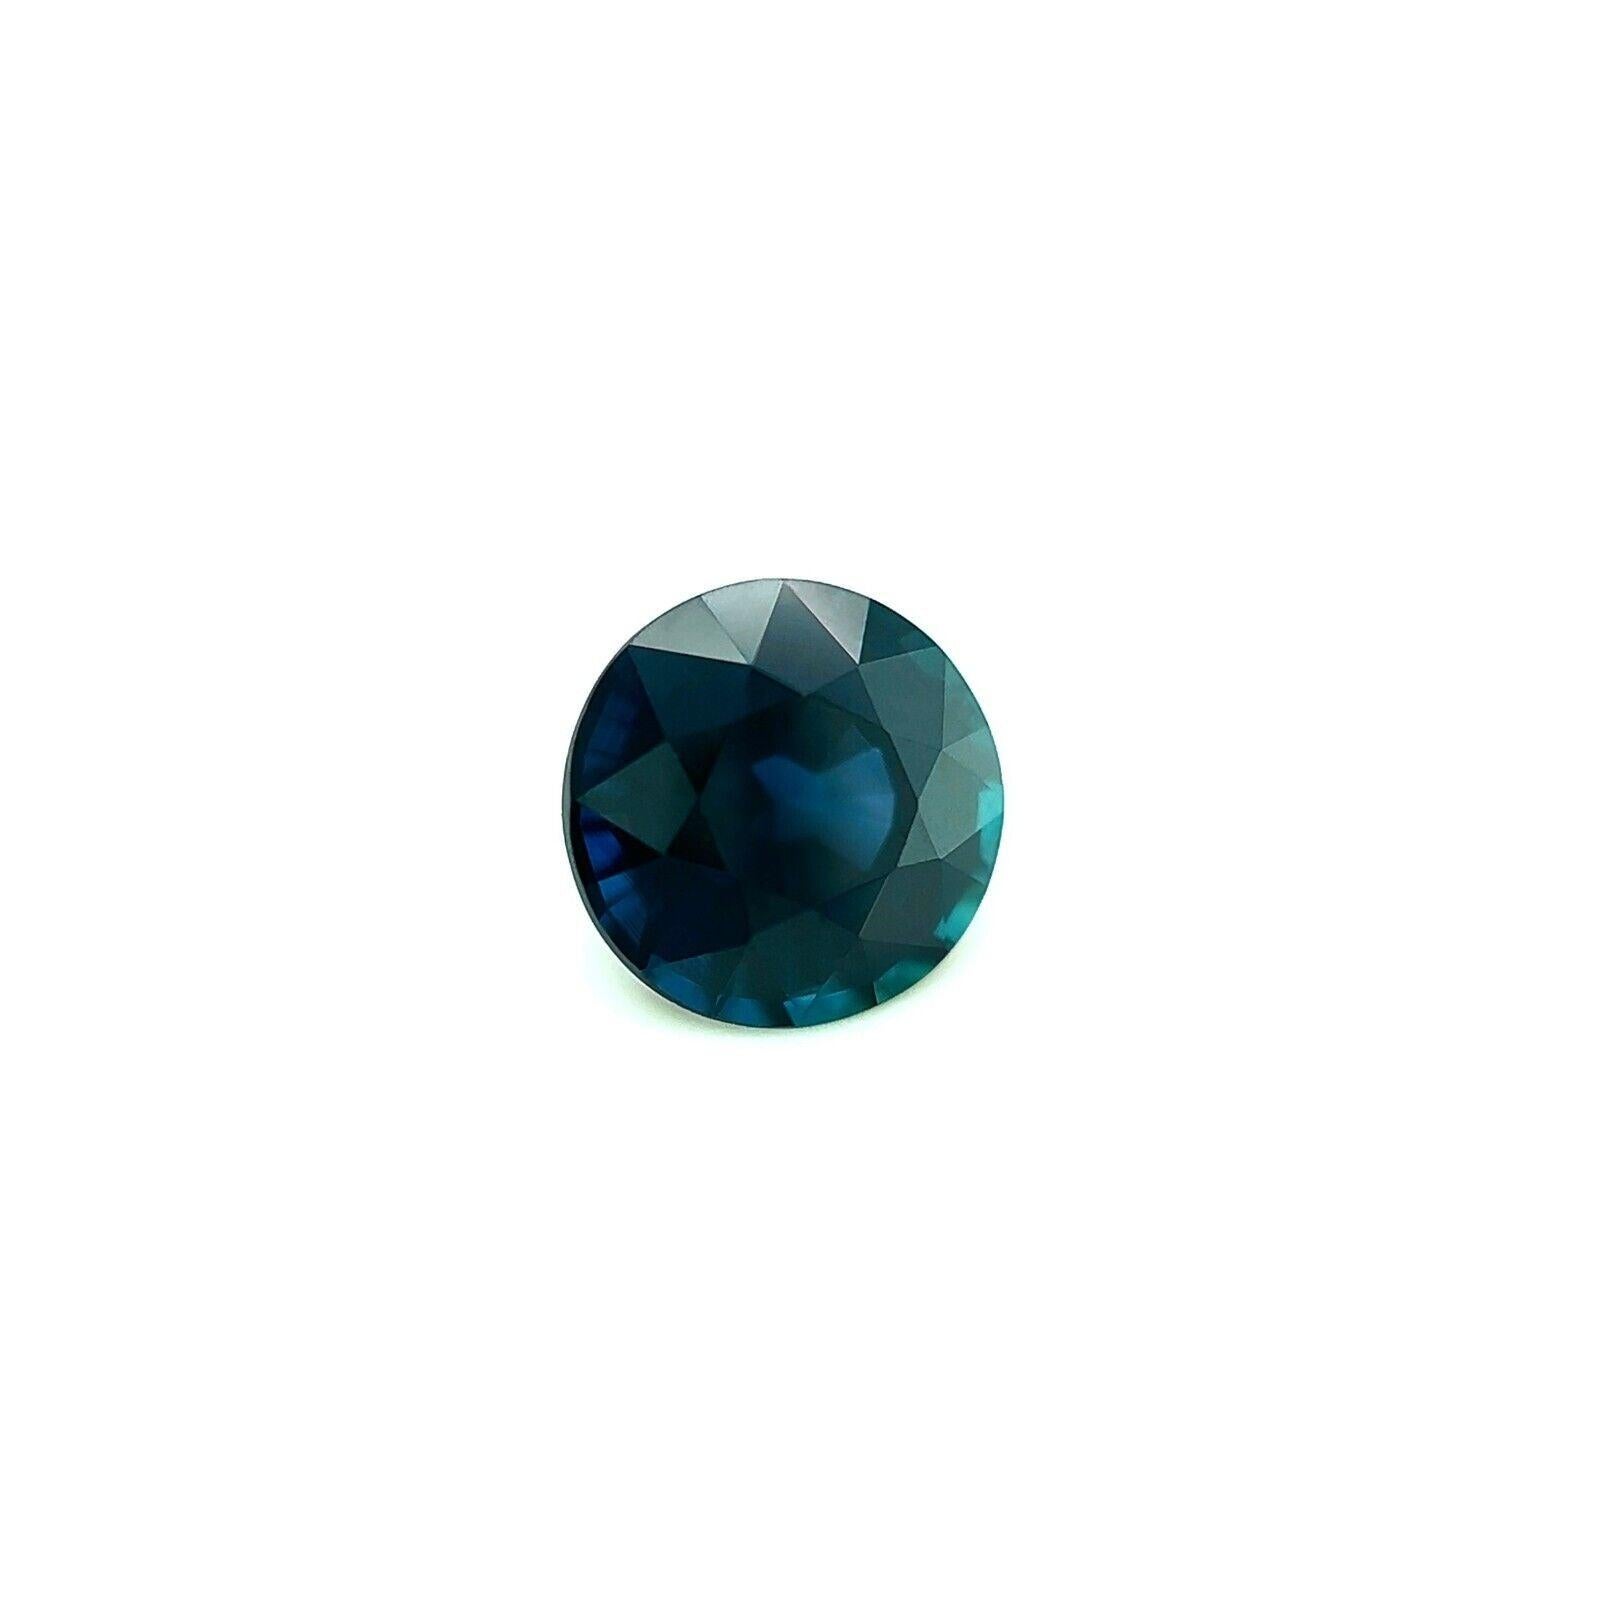 Natural Ceylon Sapphire 1.19Ct Deep Blue Round Cut Loose Rare Gem VVS
 
 Natural Deep Blue Ceylon Sapphire Gemstone.
 1.19 Carat with a beautiful deep blue colour and excellent clarity. Very clean stone. VVS.
 Also has an an excellent round cut and